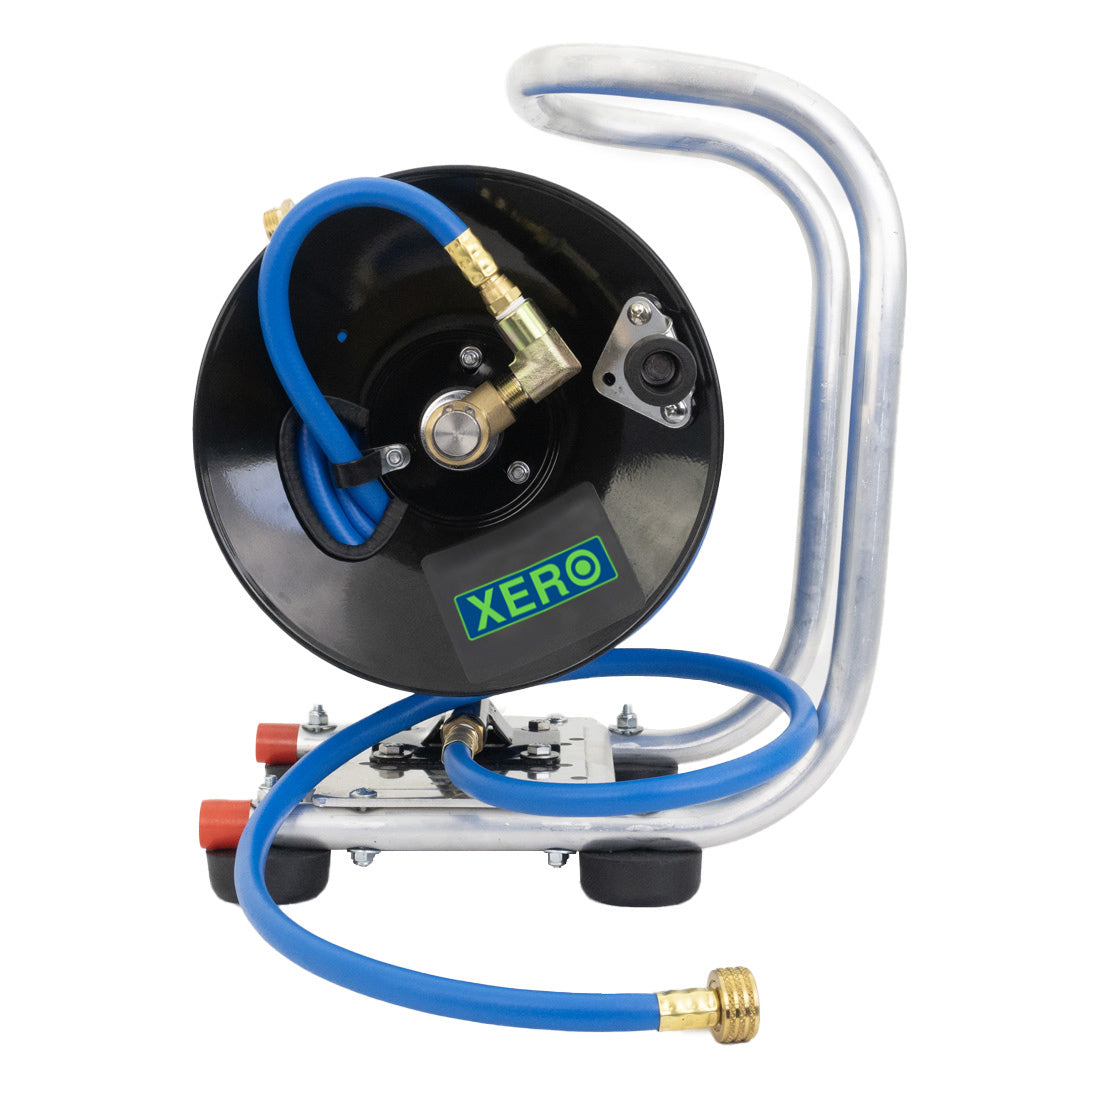 We compared all of the top garden hose reels. Just uploaded on the